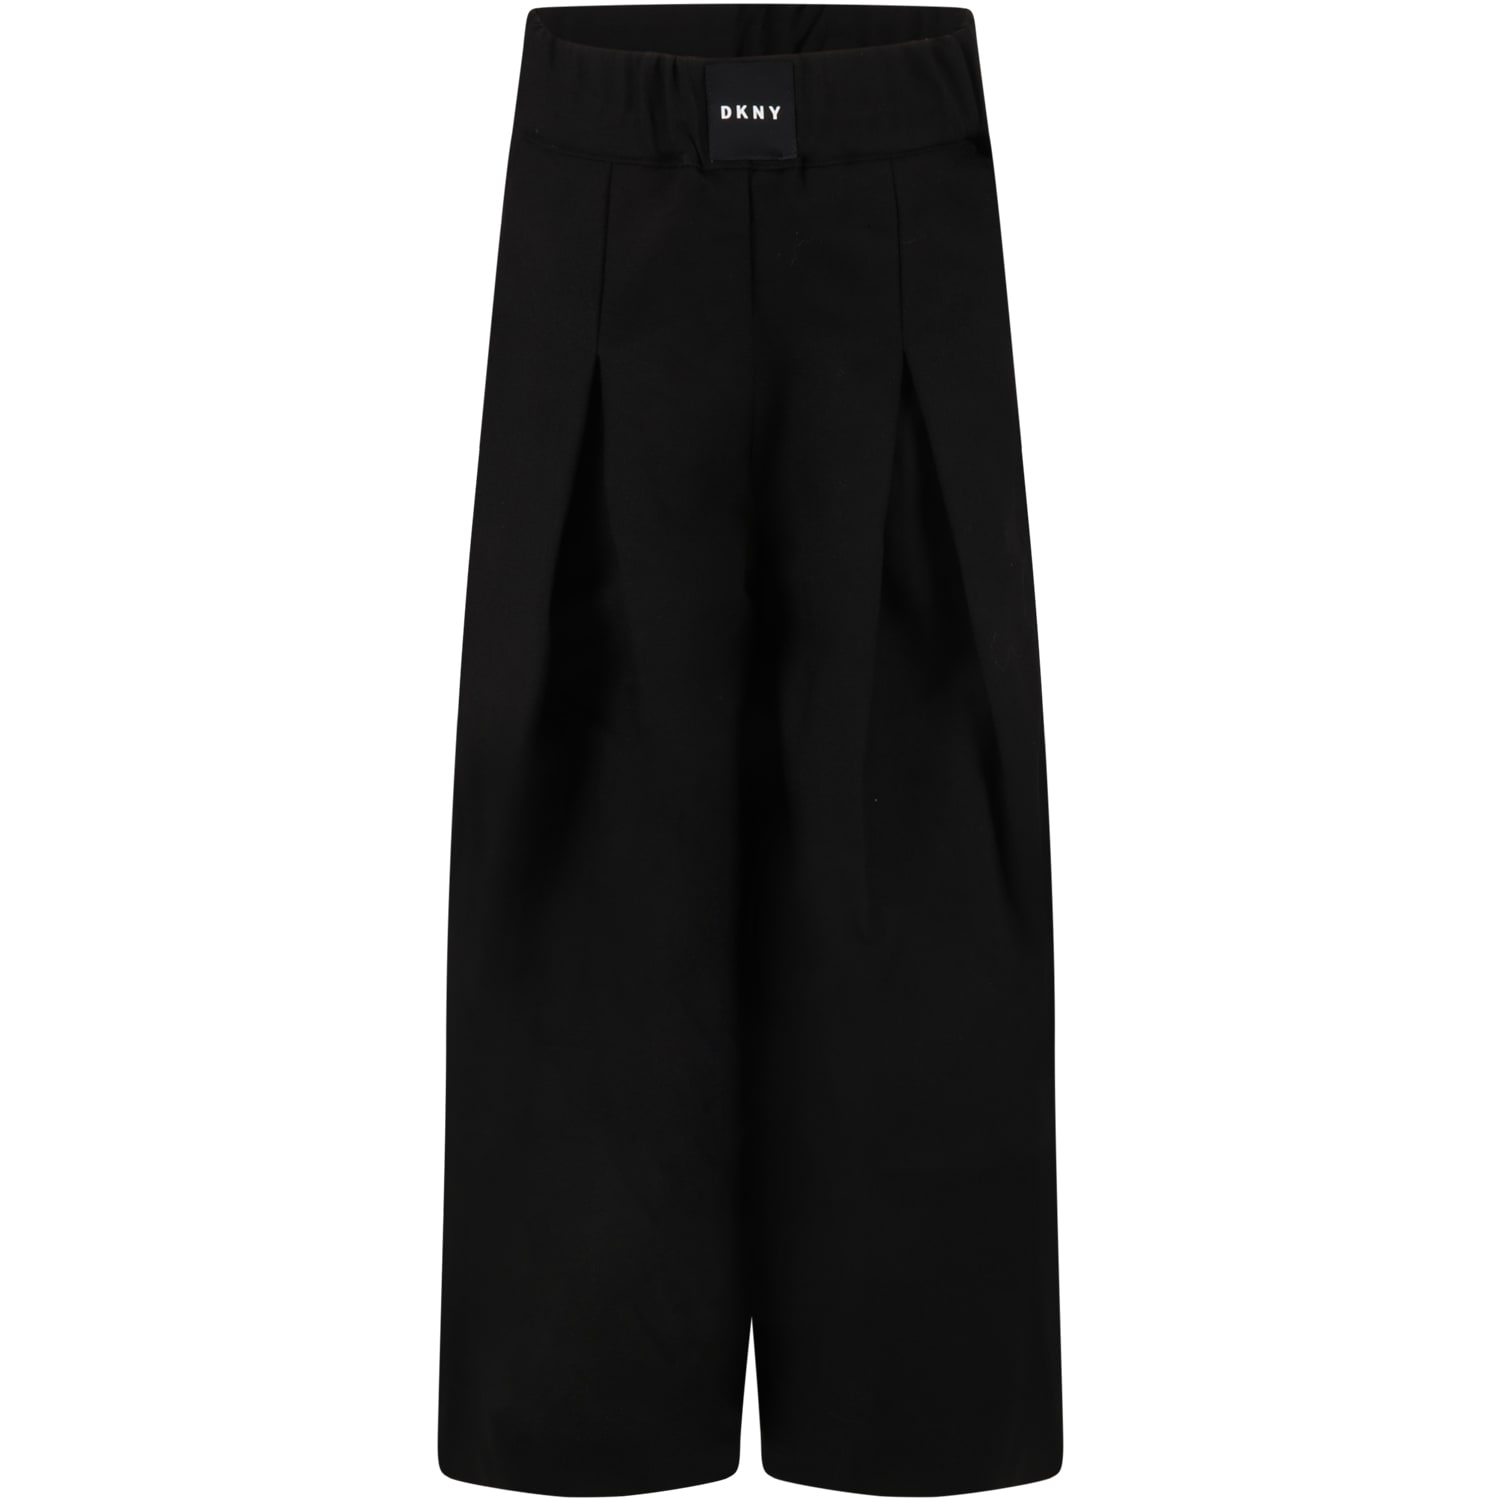 DKNY Black Trousers For Girl With Pach Logo